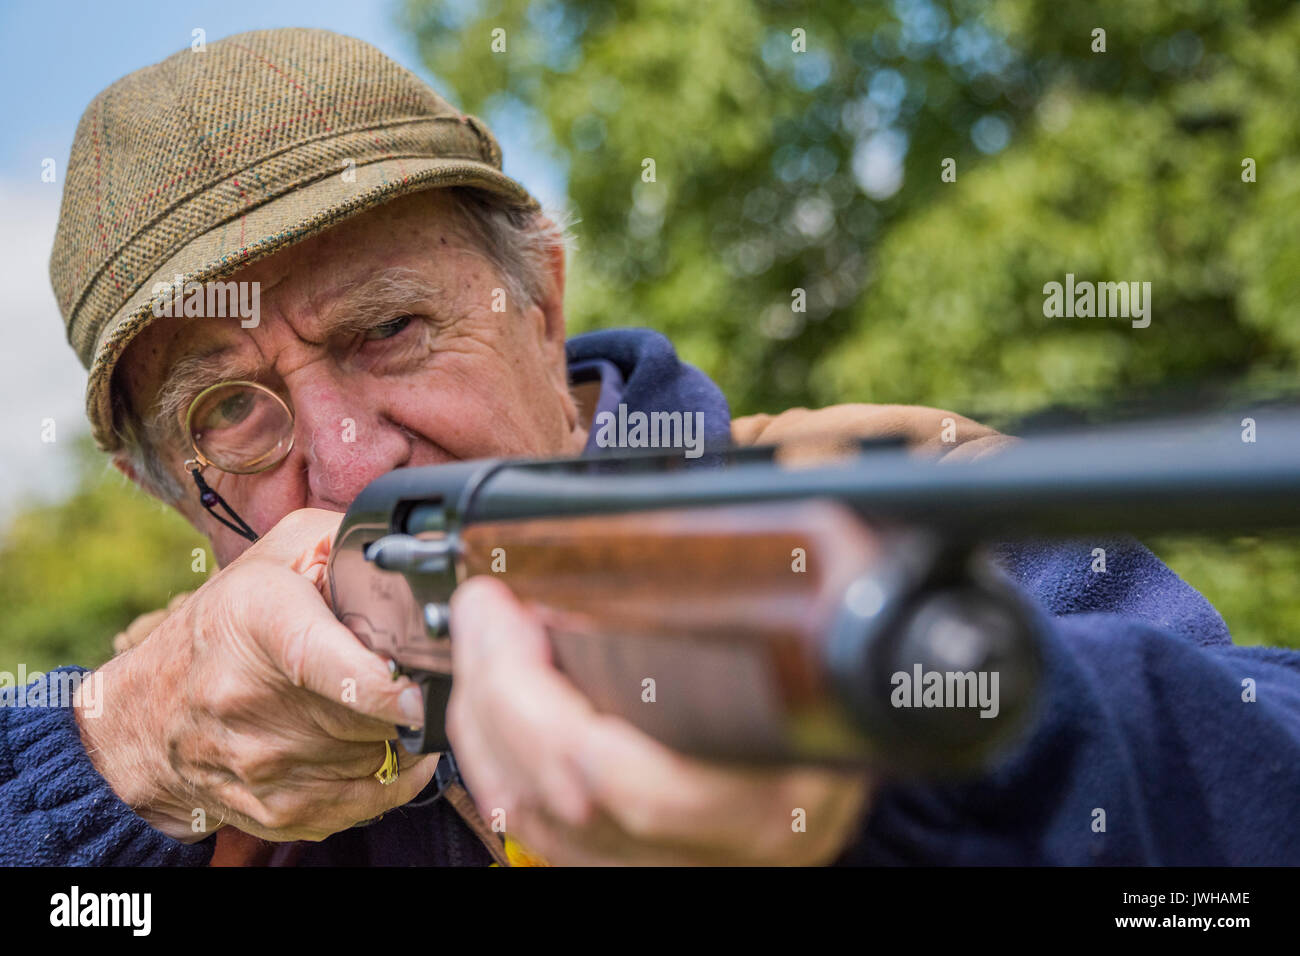 Sussex, UK. 12th Aug, 2017. The glorious 12th and Kevin celebrates his 88th birthday with gun and dog. Credit: Guy Bell/Alamy Live News Stock Photo